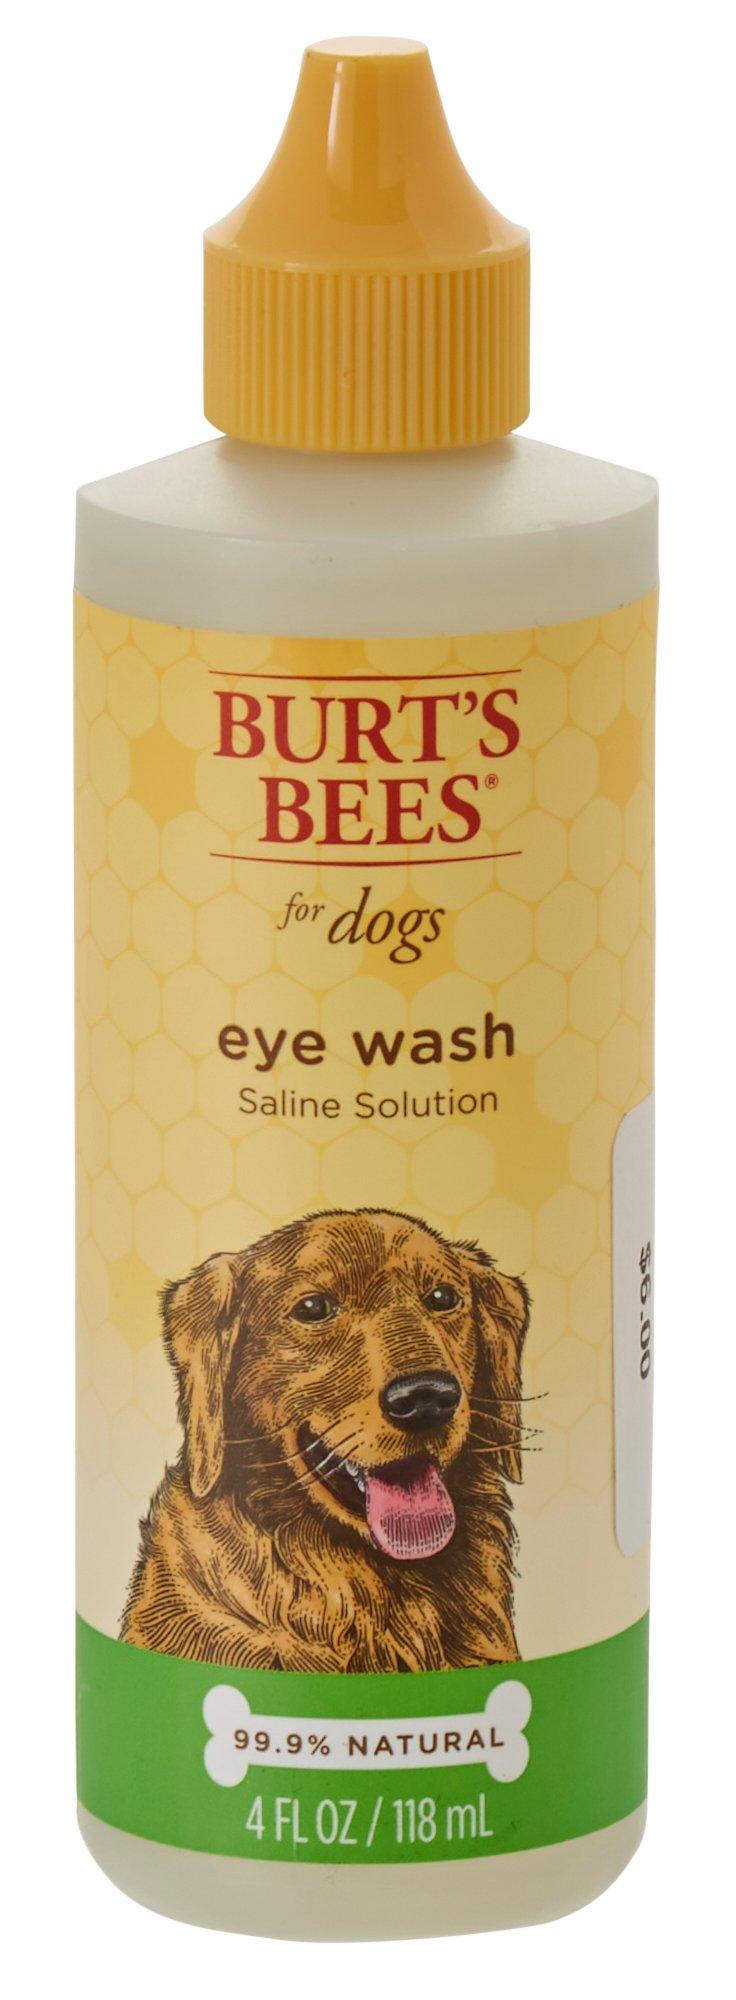 Saline Solution Eye Wash For Dogs